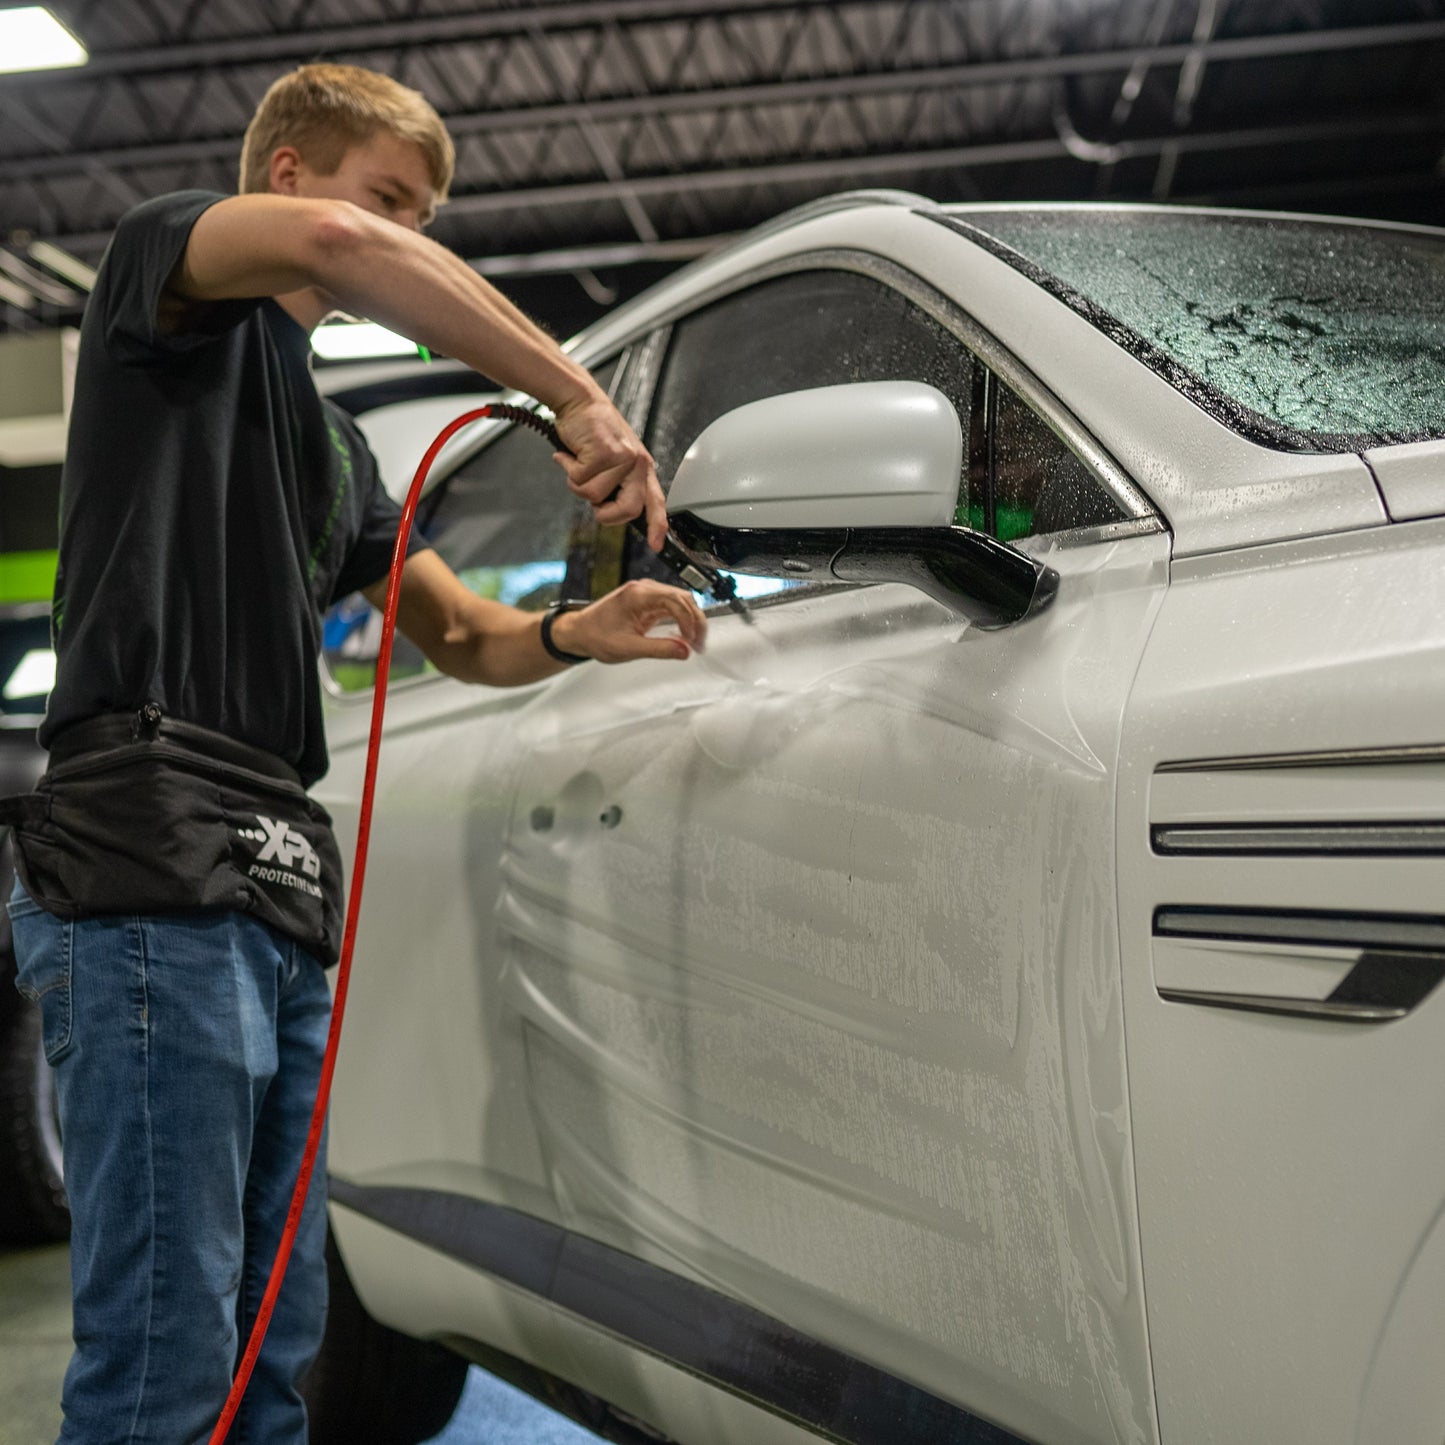 Full Wrap Paint Protection Film - XPEL ULTIMATE PLUS - Gift Certificate